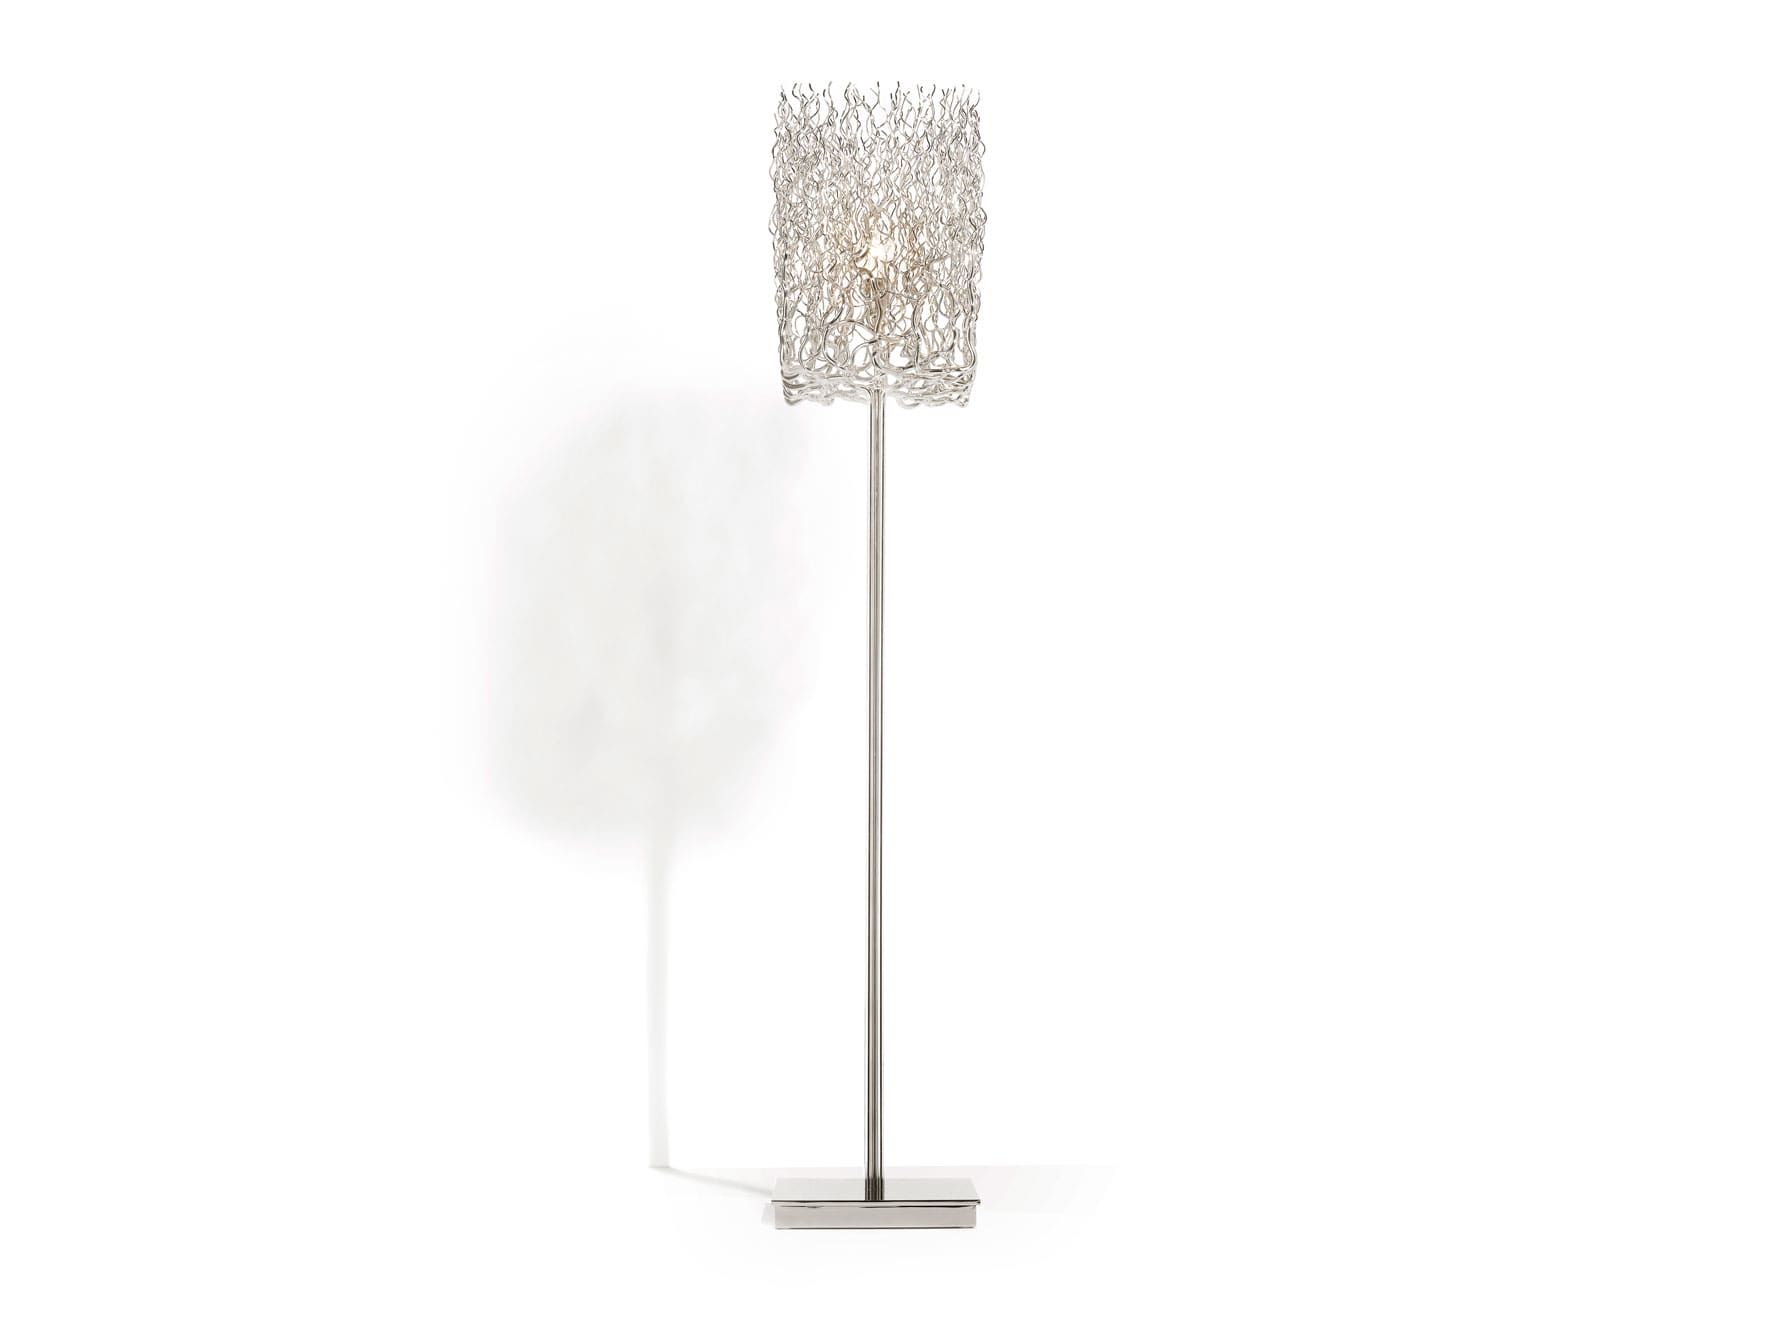 Hollywood Collection modern Italian floor lamp with silver metal